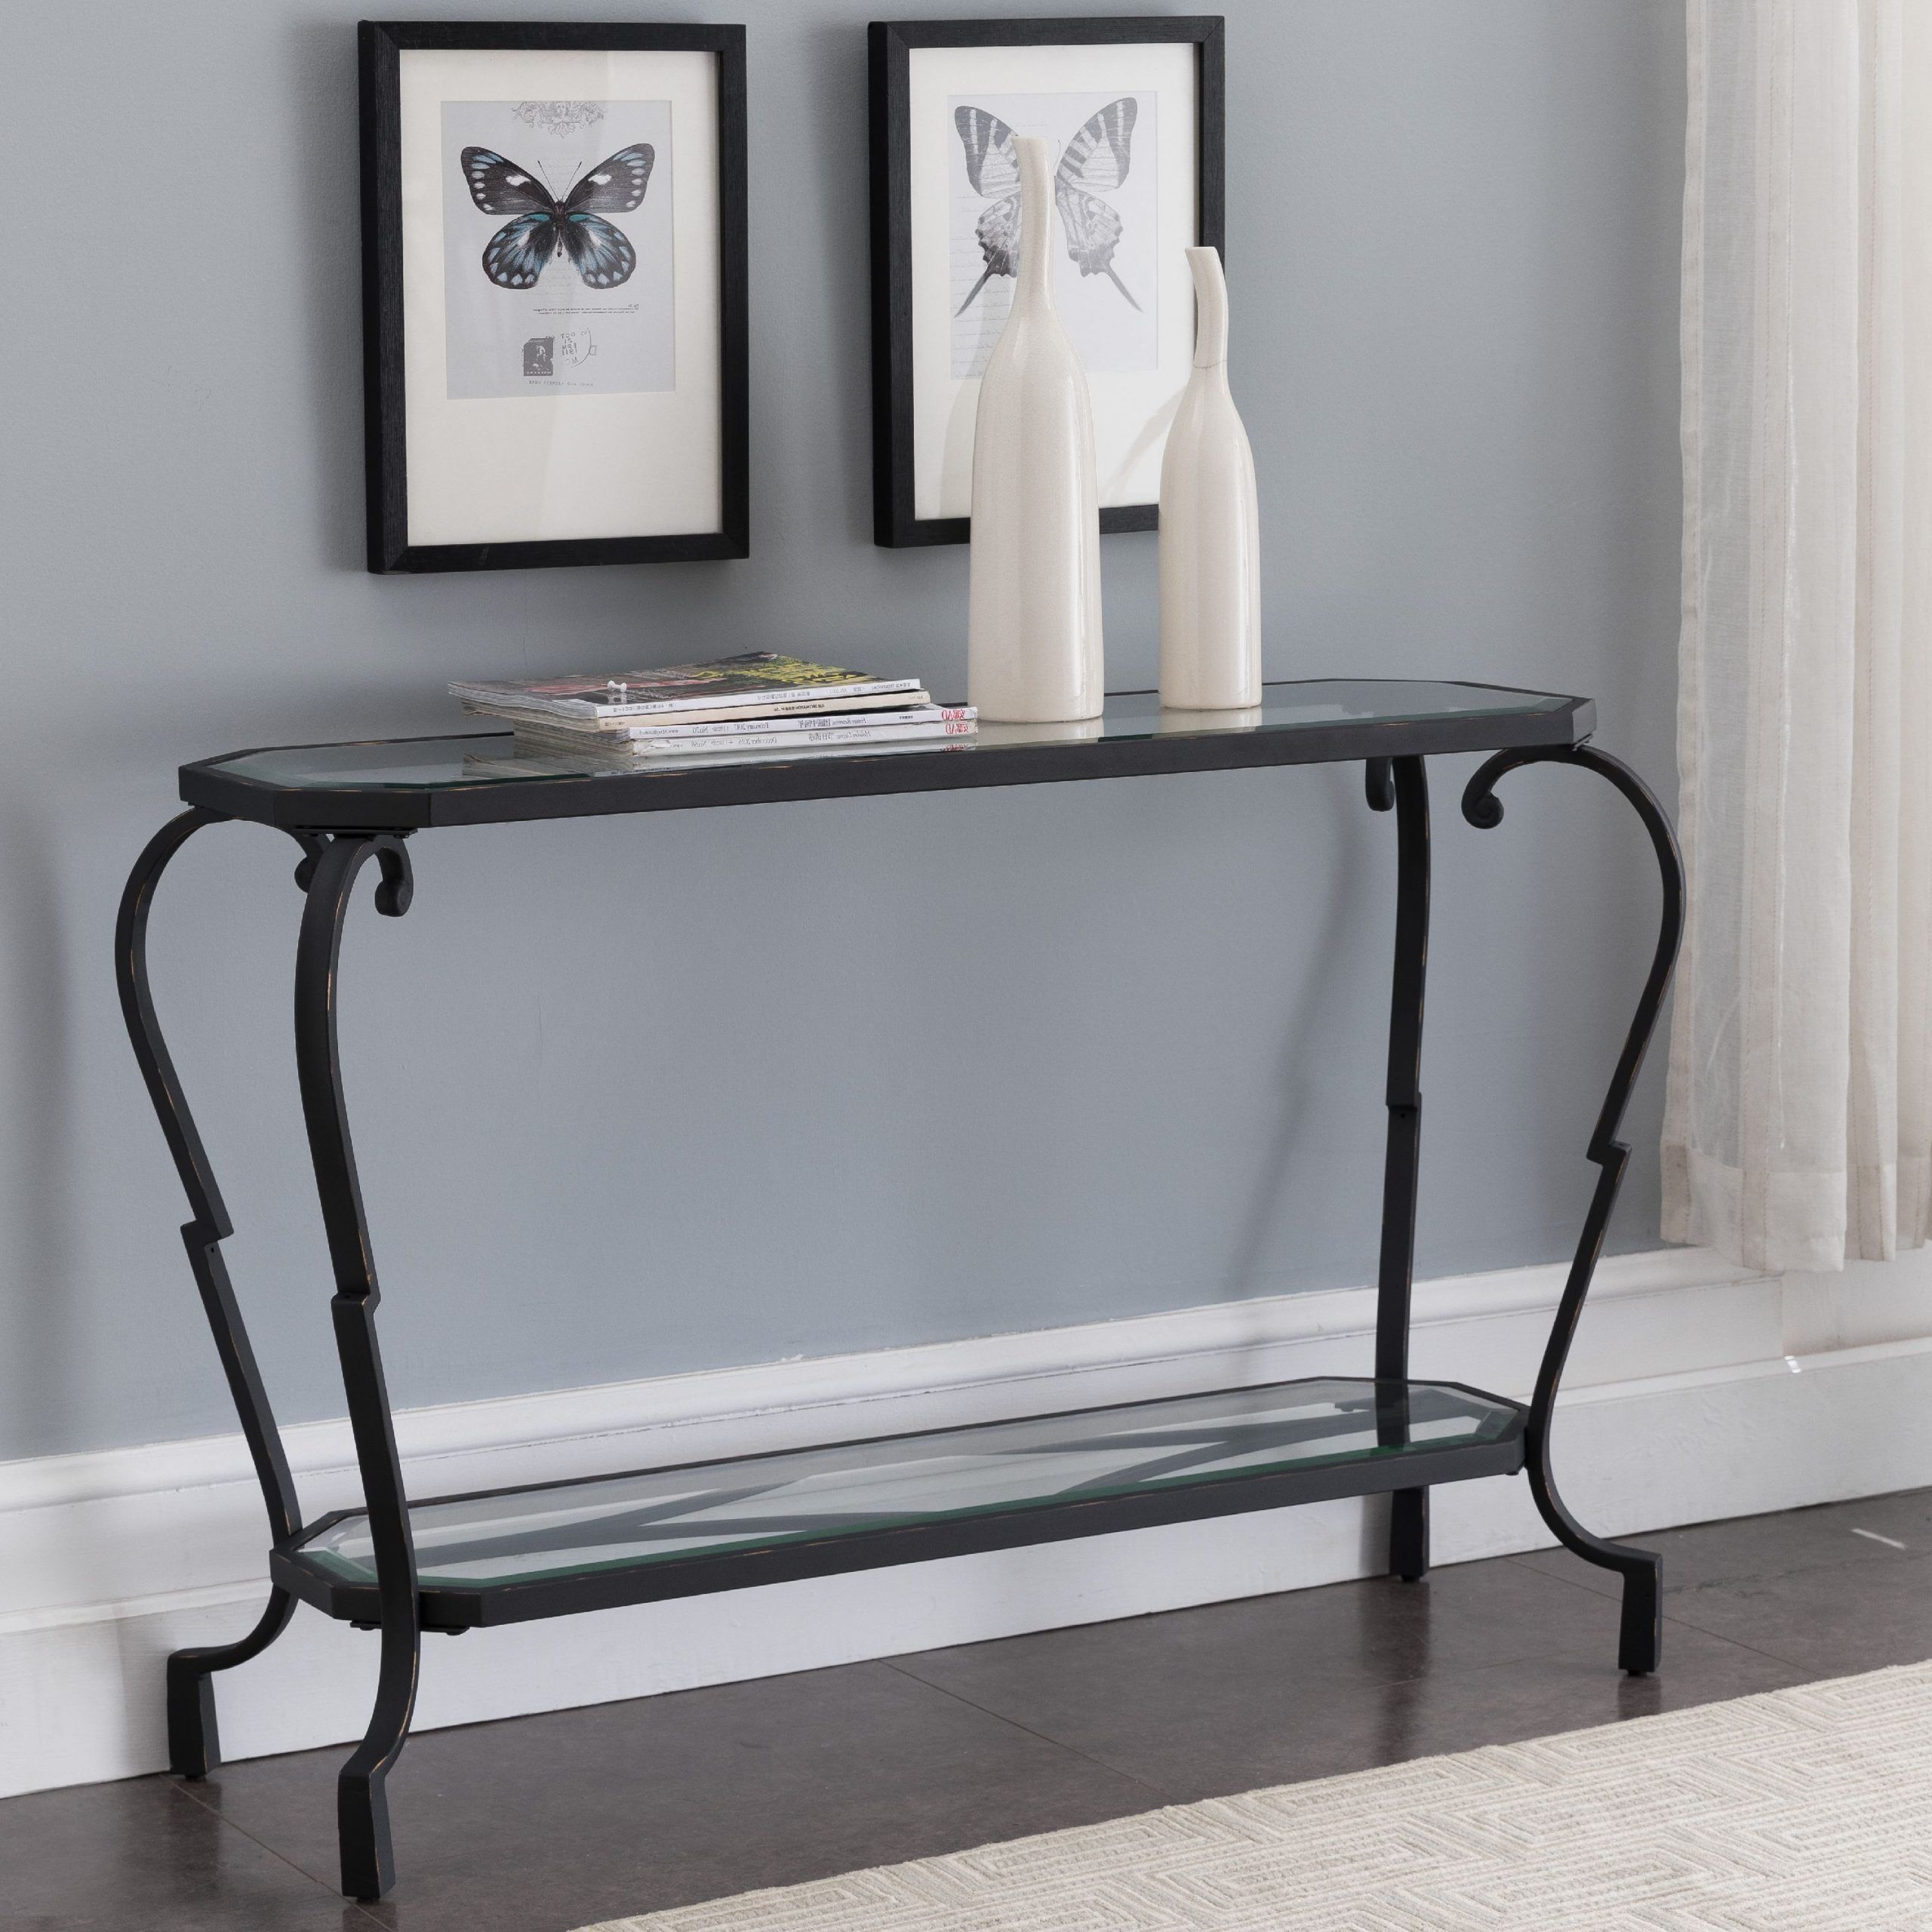 Jordan Modern Entryway Console Table, Textured Black Inside Caviar Black Console Tables (View 2 of 20)